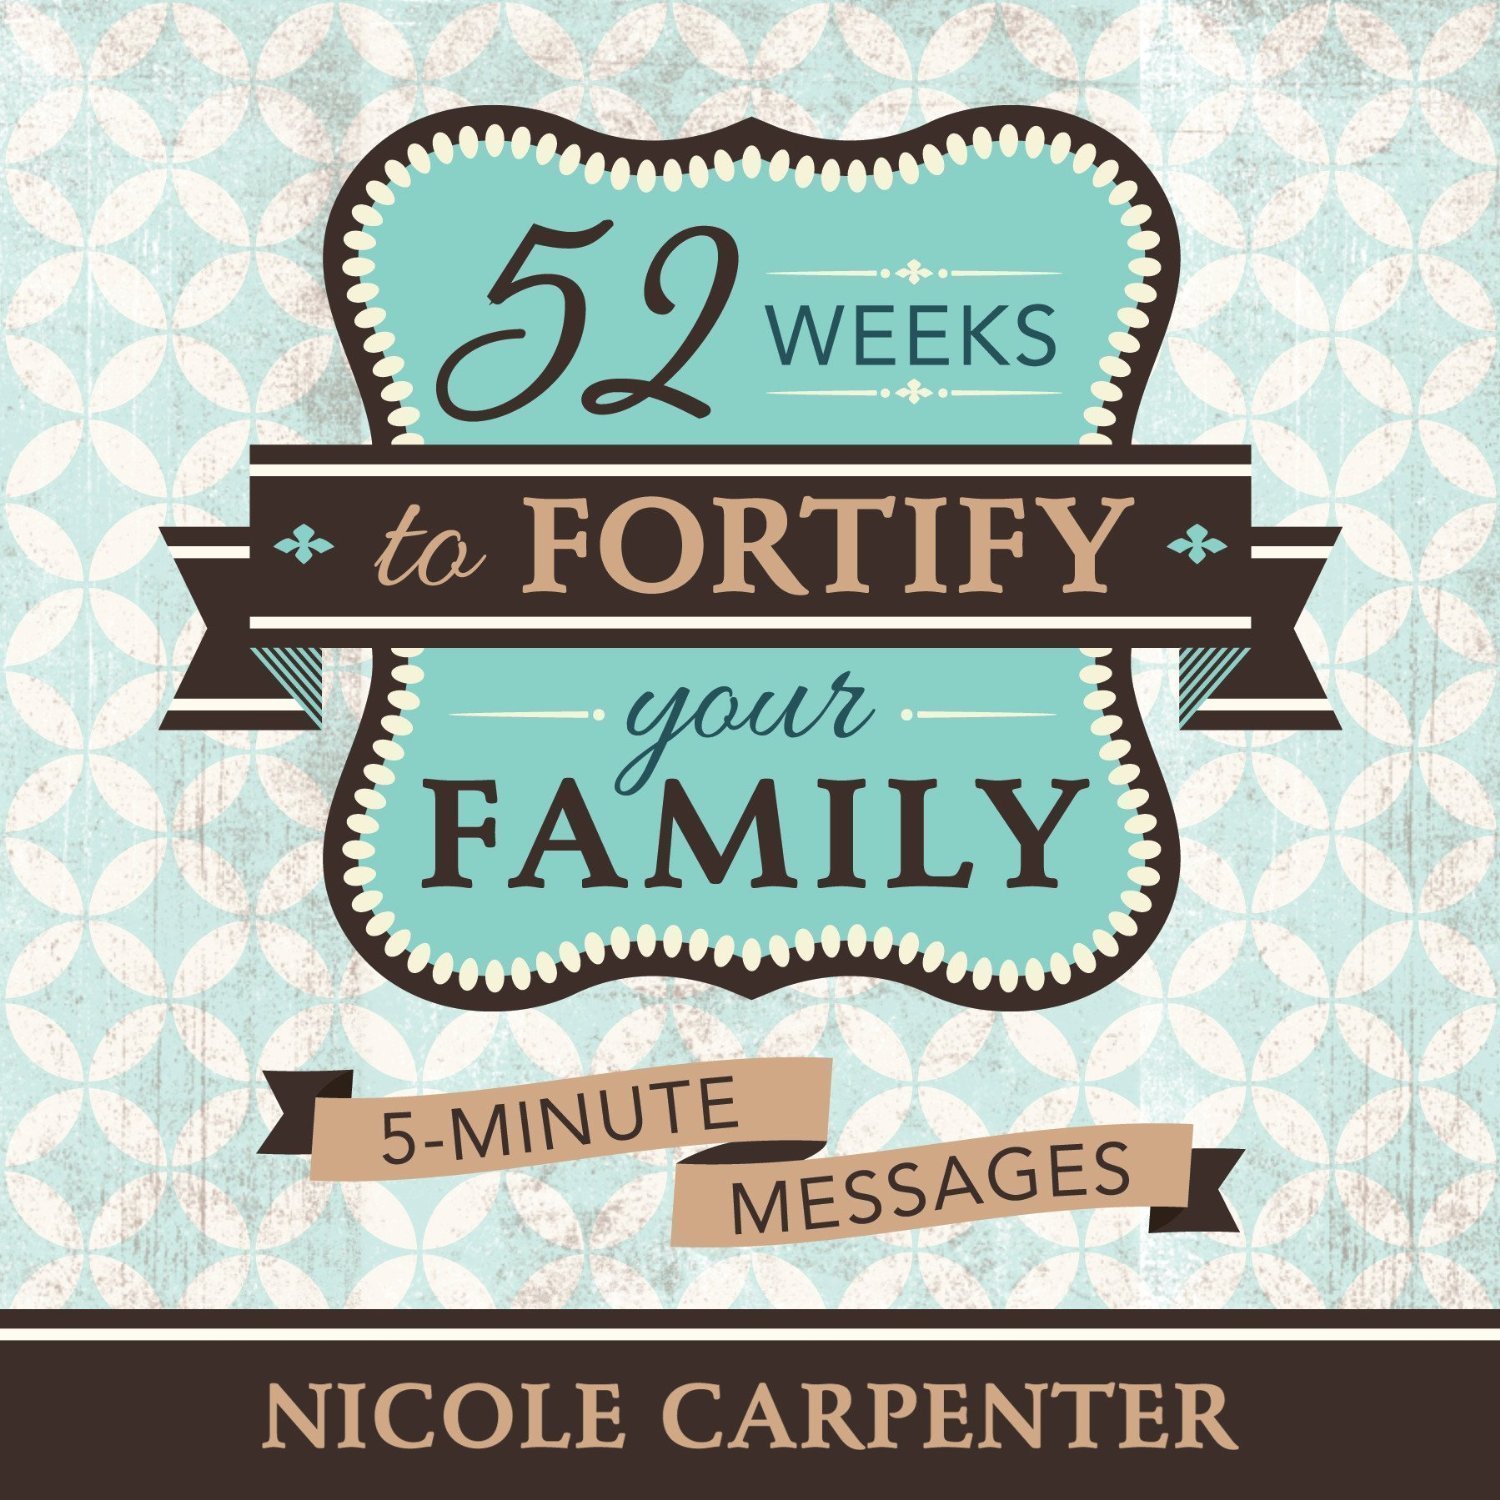 52 Weeks to Fortify Your Family